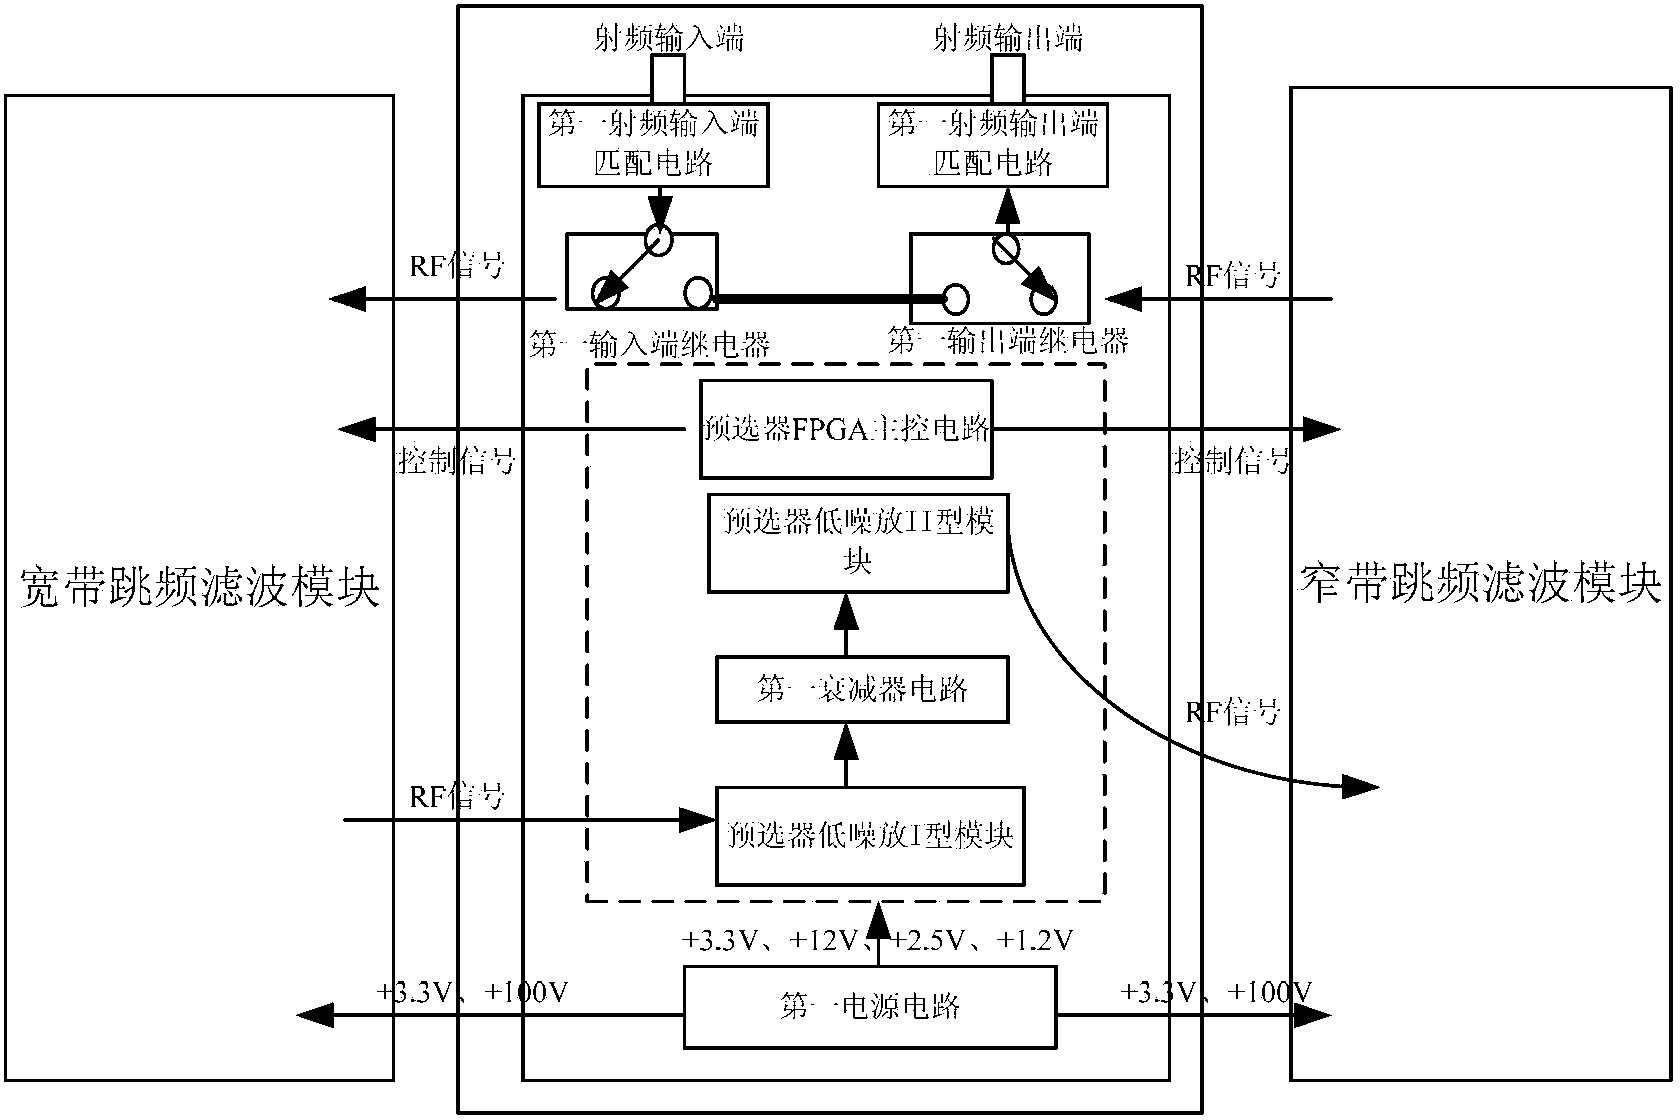 Short-wave narrow-band frequency-hopping pre-back selector